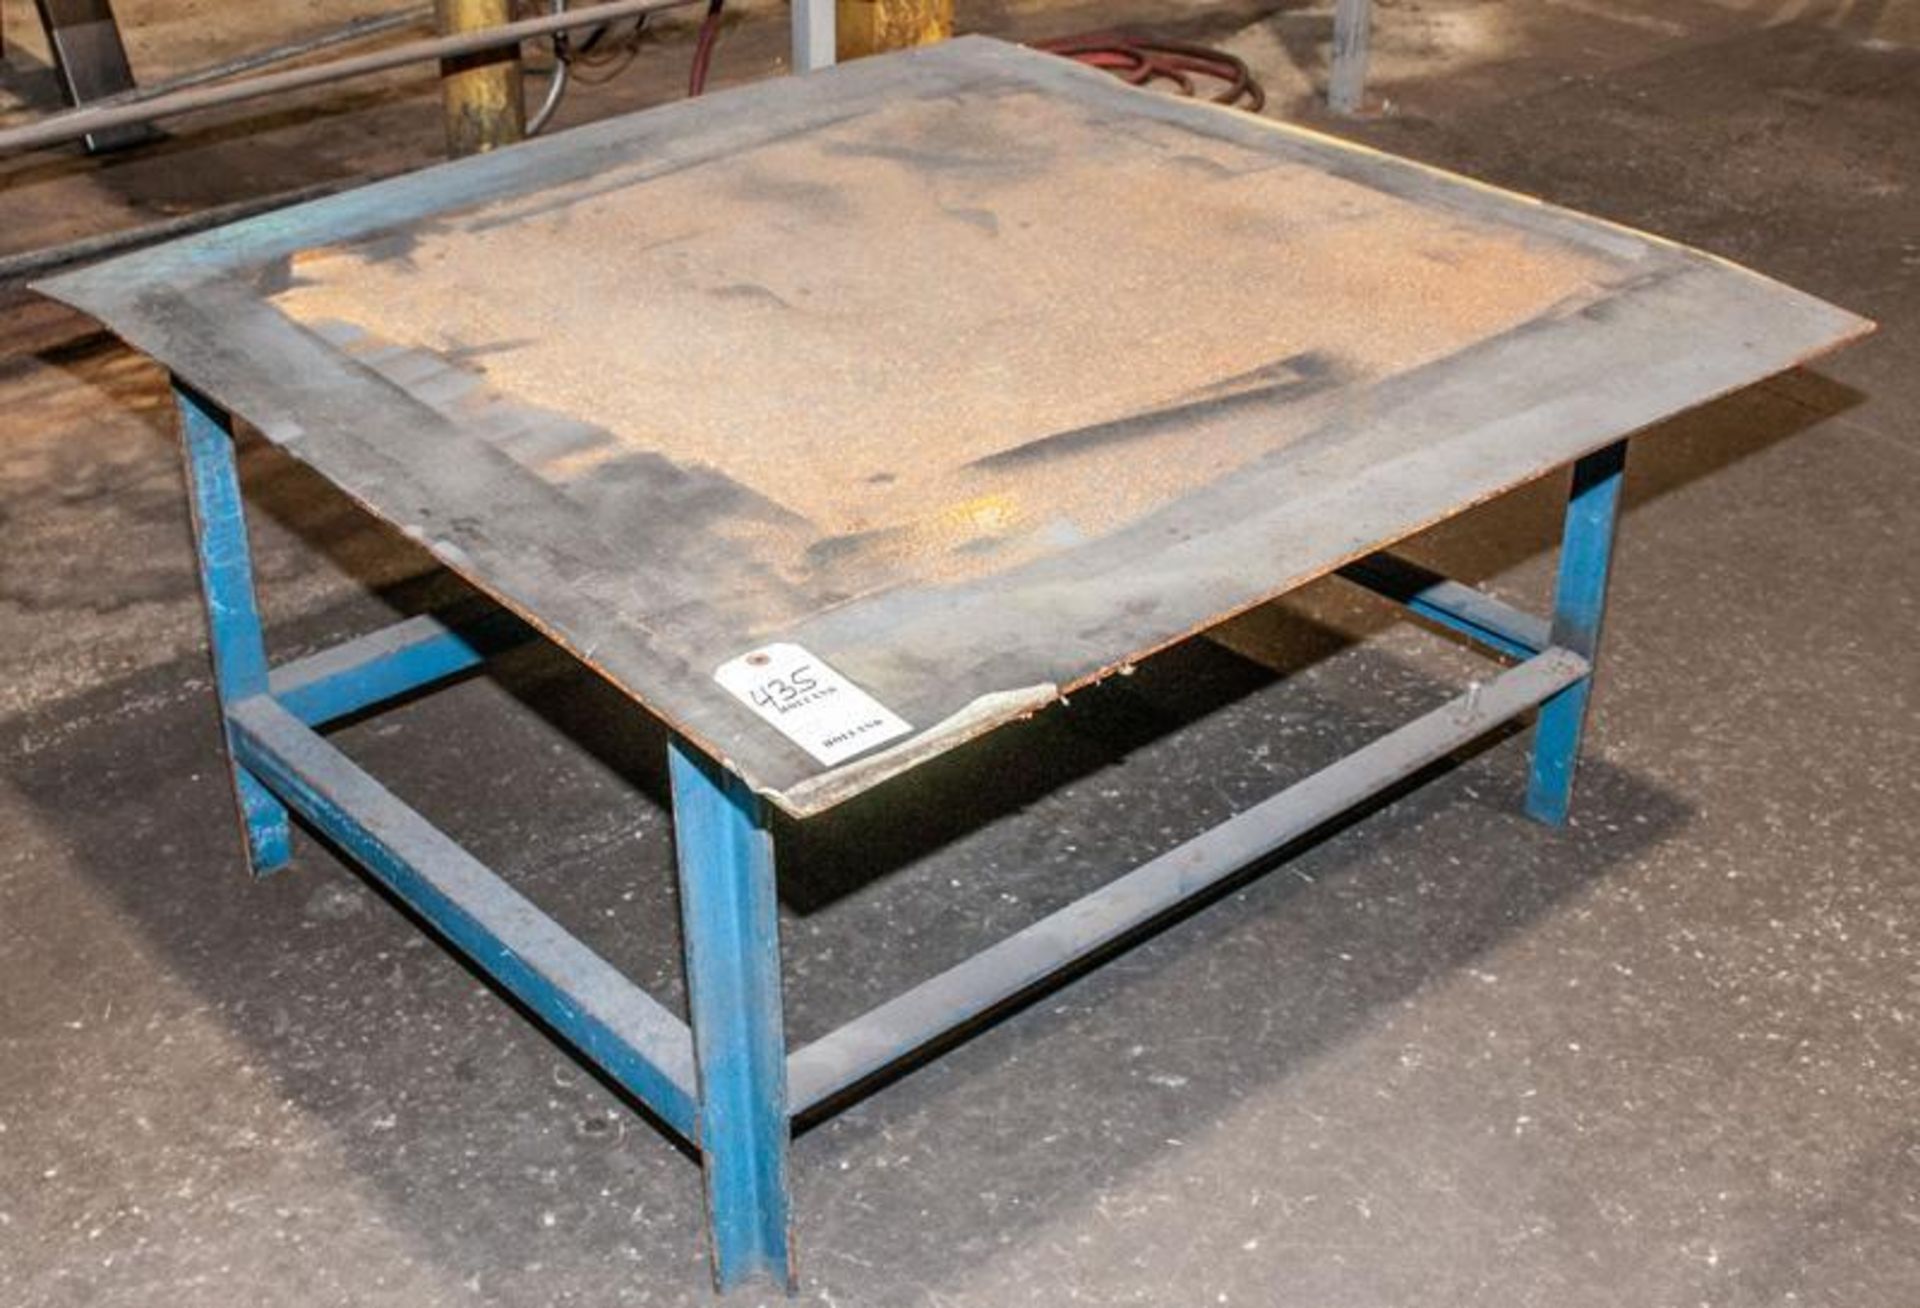 Steel table approx. 48 x 48" x 24"T